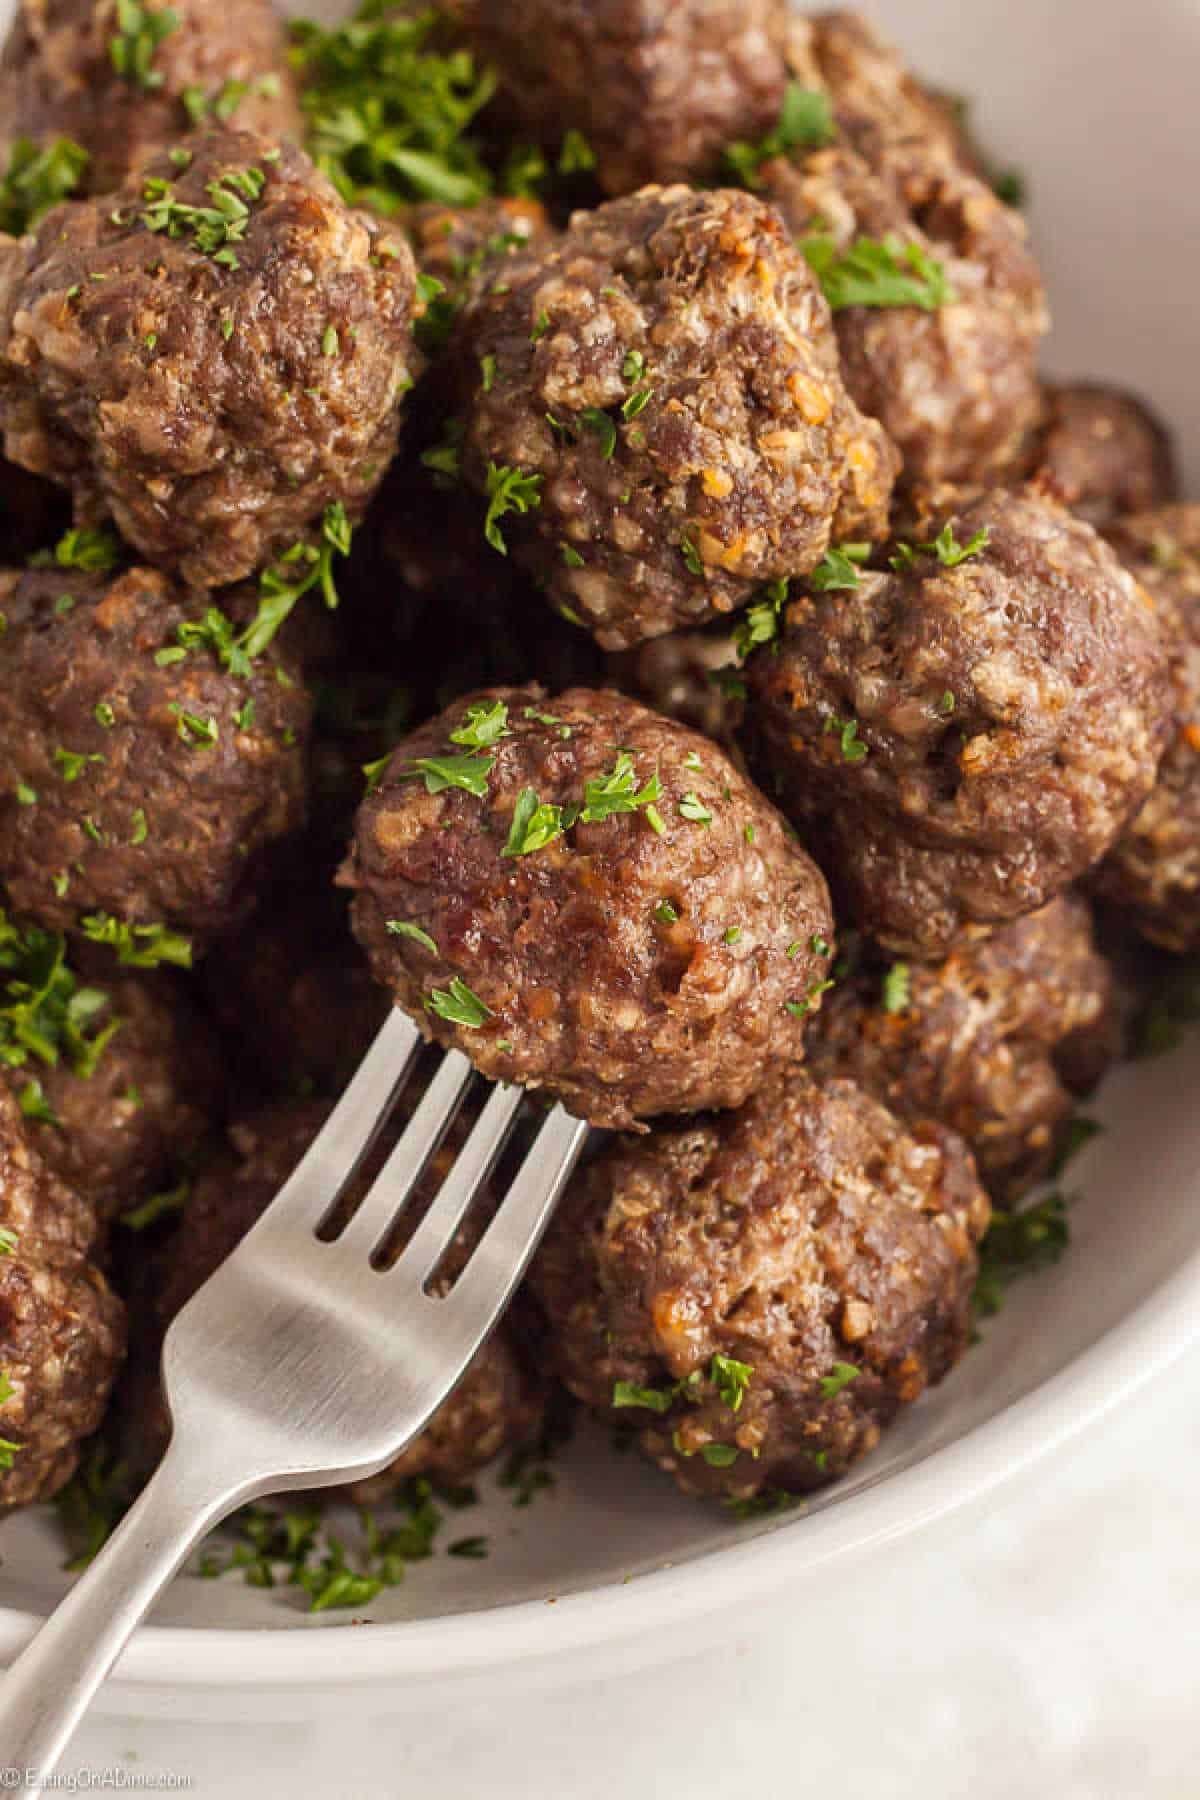 Meatballs stacked in a bowl